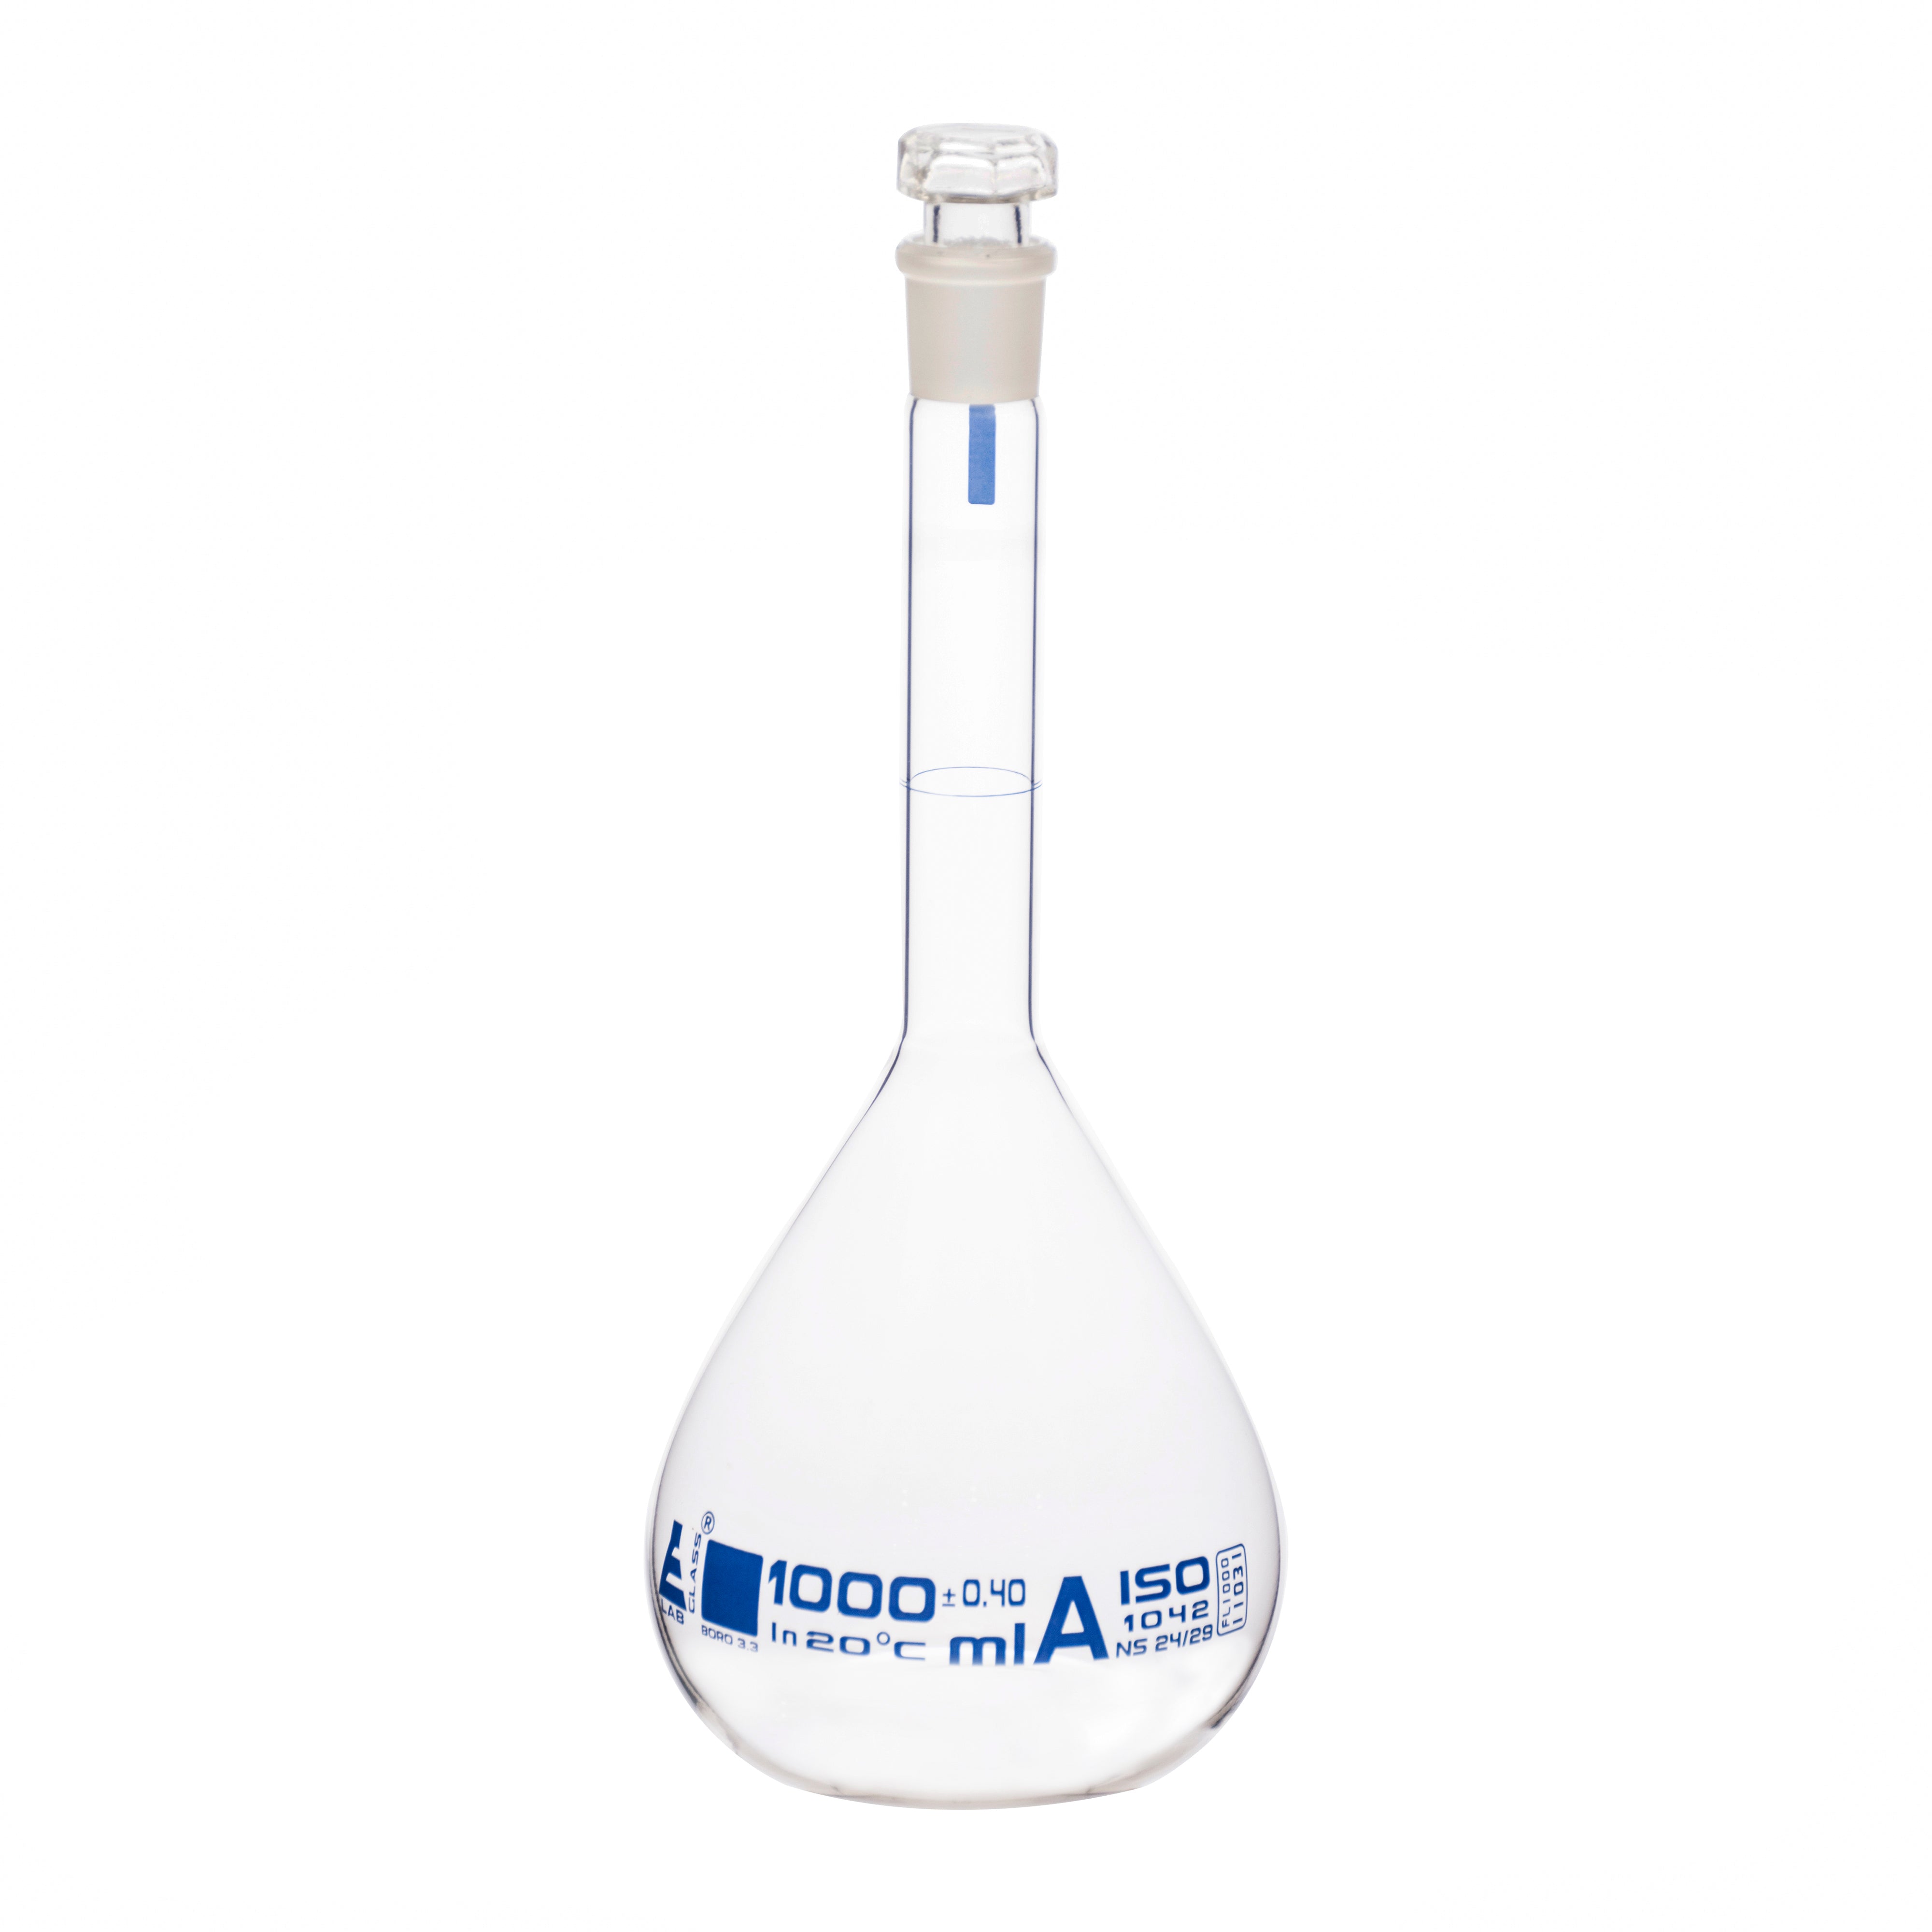 Borosilicate Volumetric Flask with Hollow Glass Stopper, 1000ml, Class A, Blue Print, Autoclavable